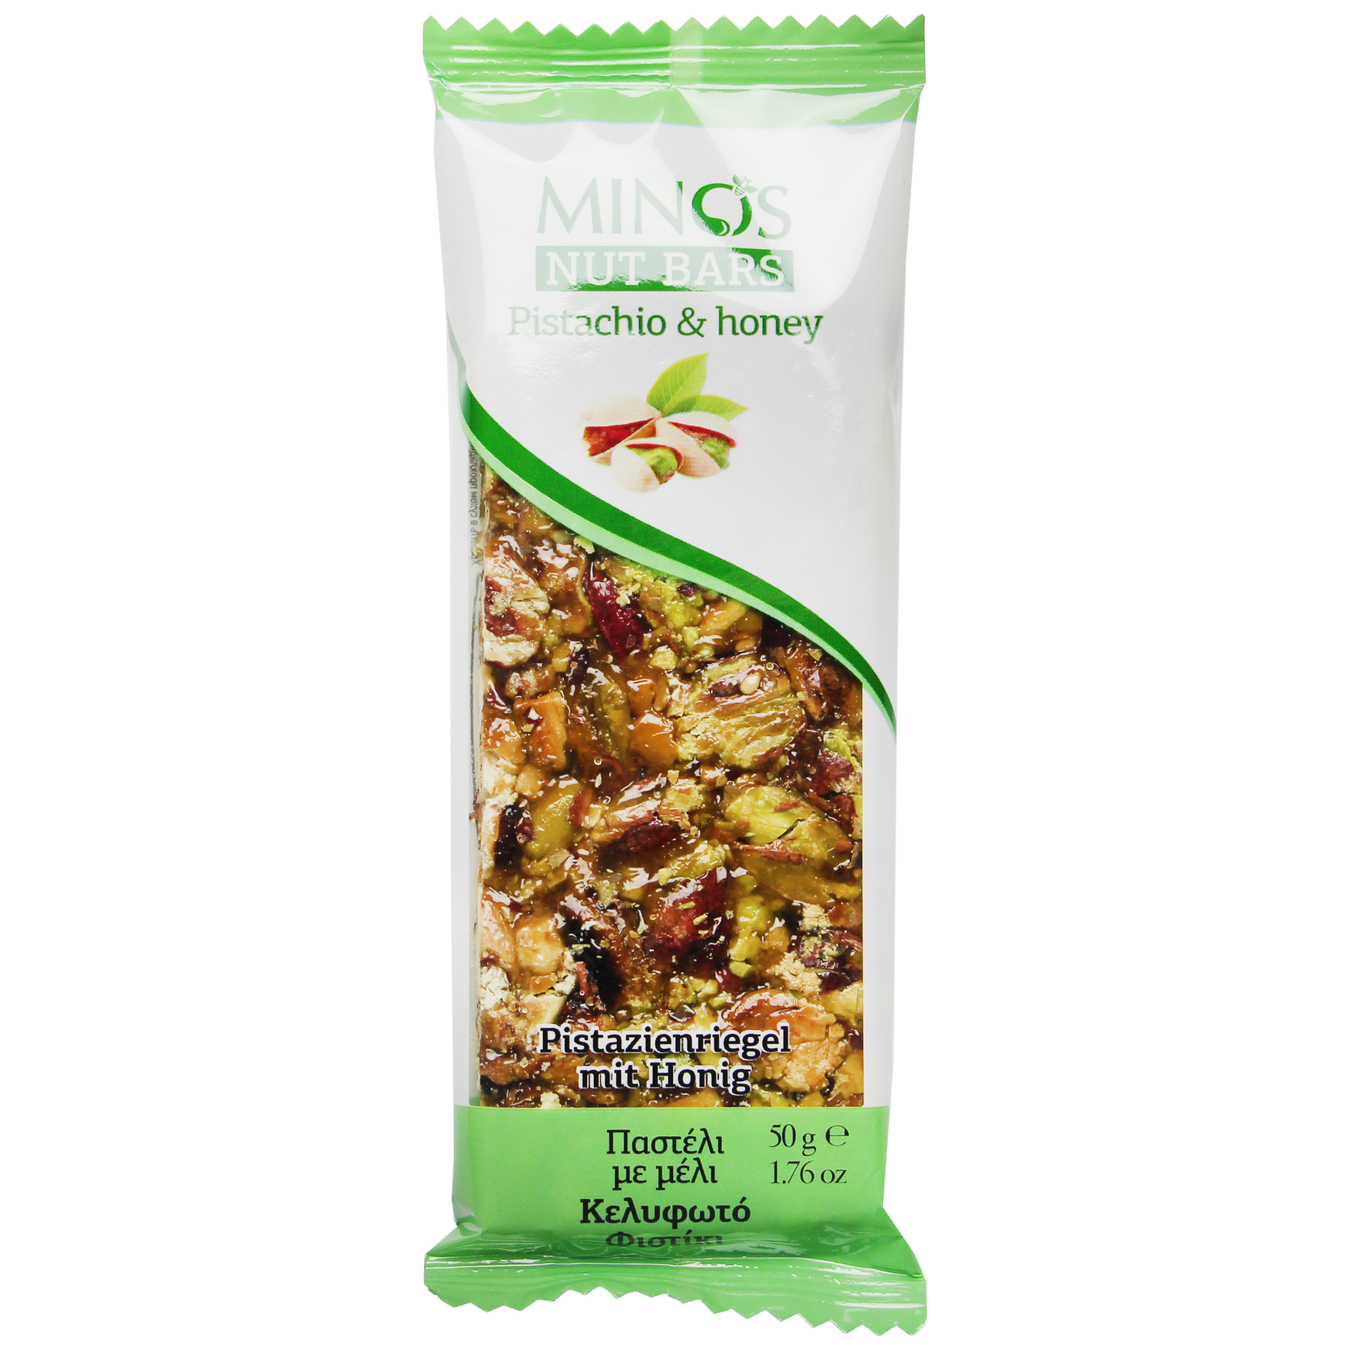 Minos With Pistachio And Honey Nut Bar 50g